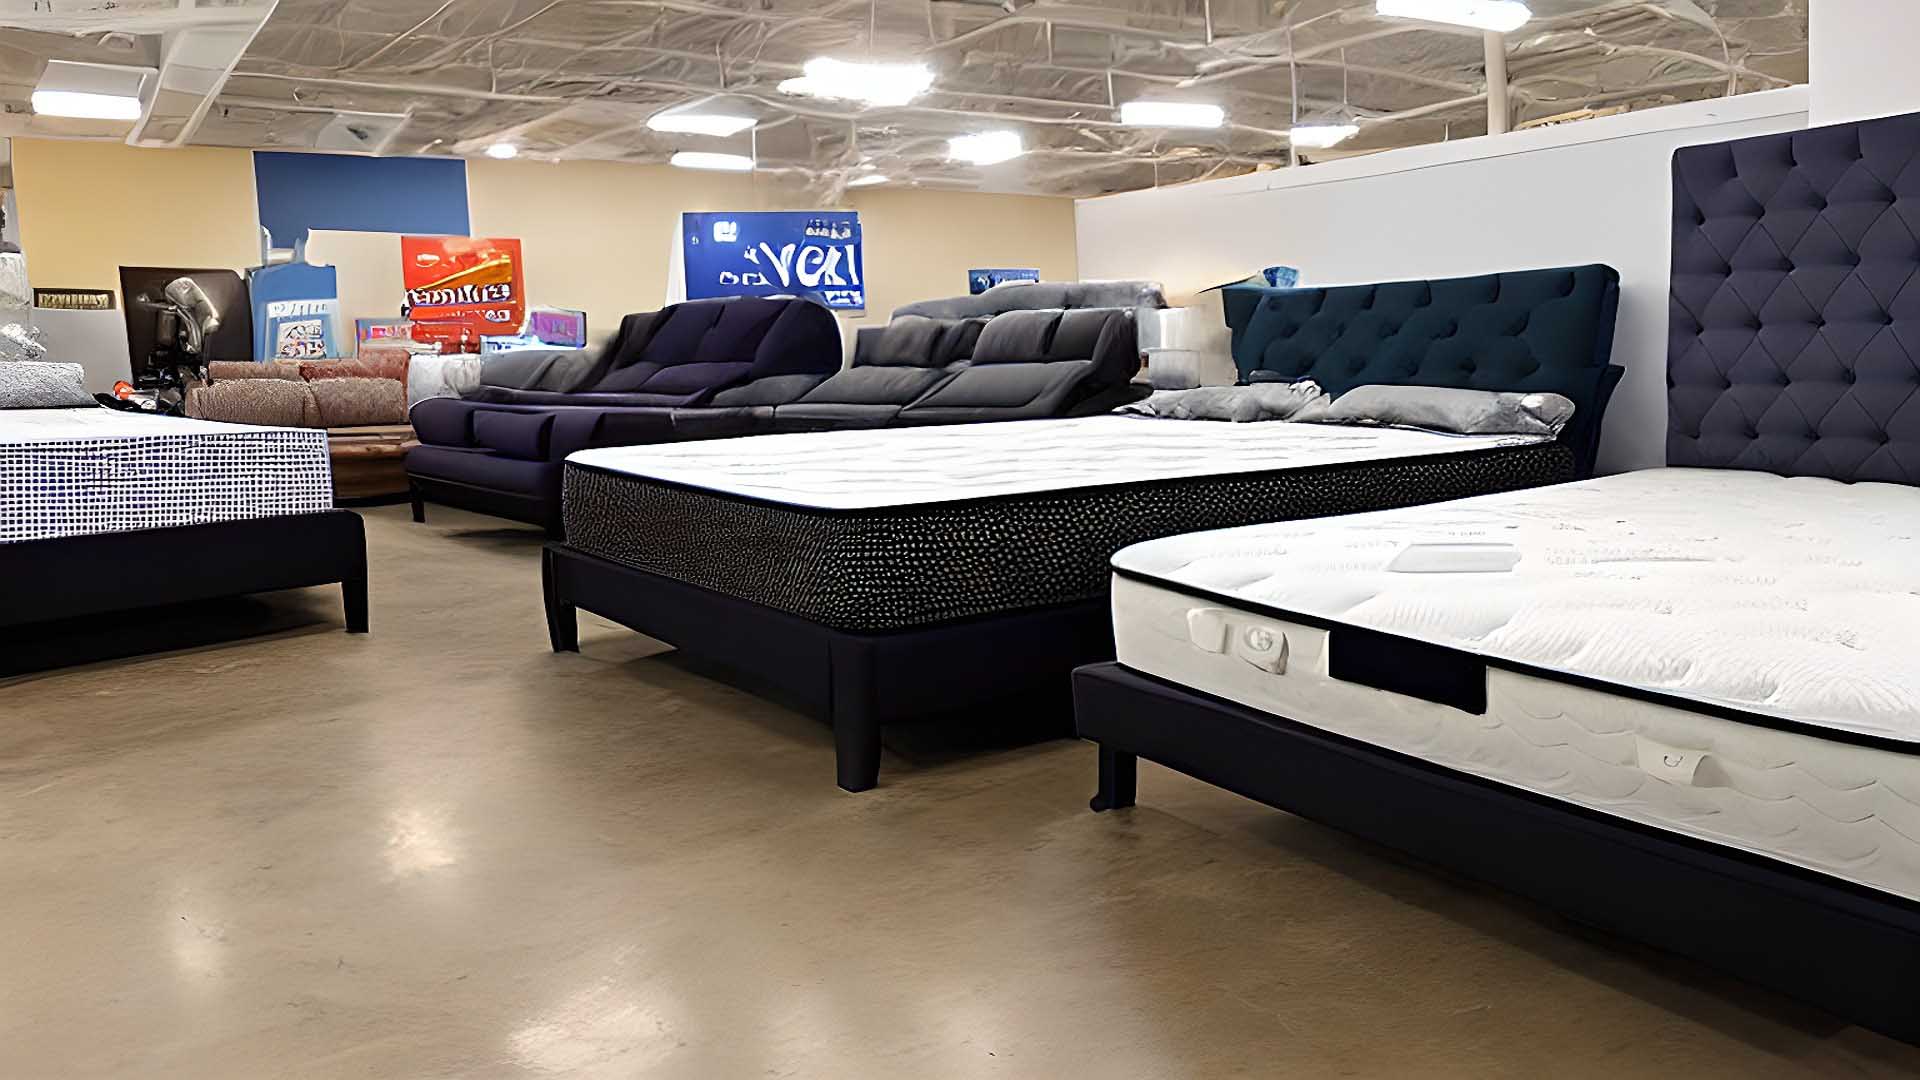 Mattress Deals in Lakewood, OH